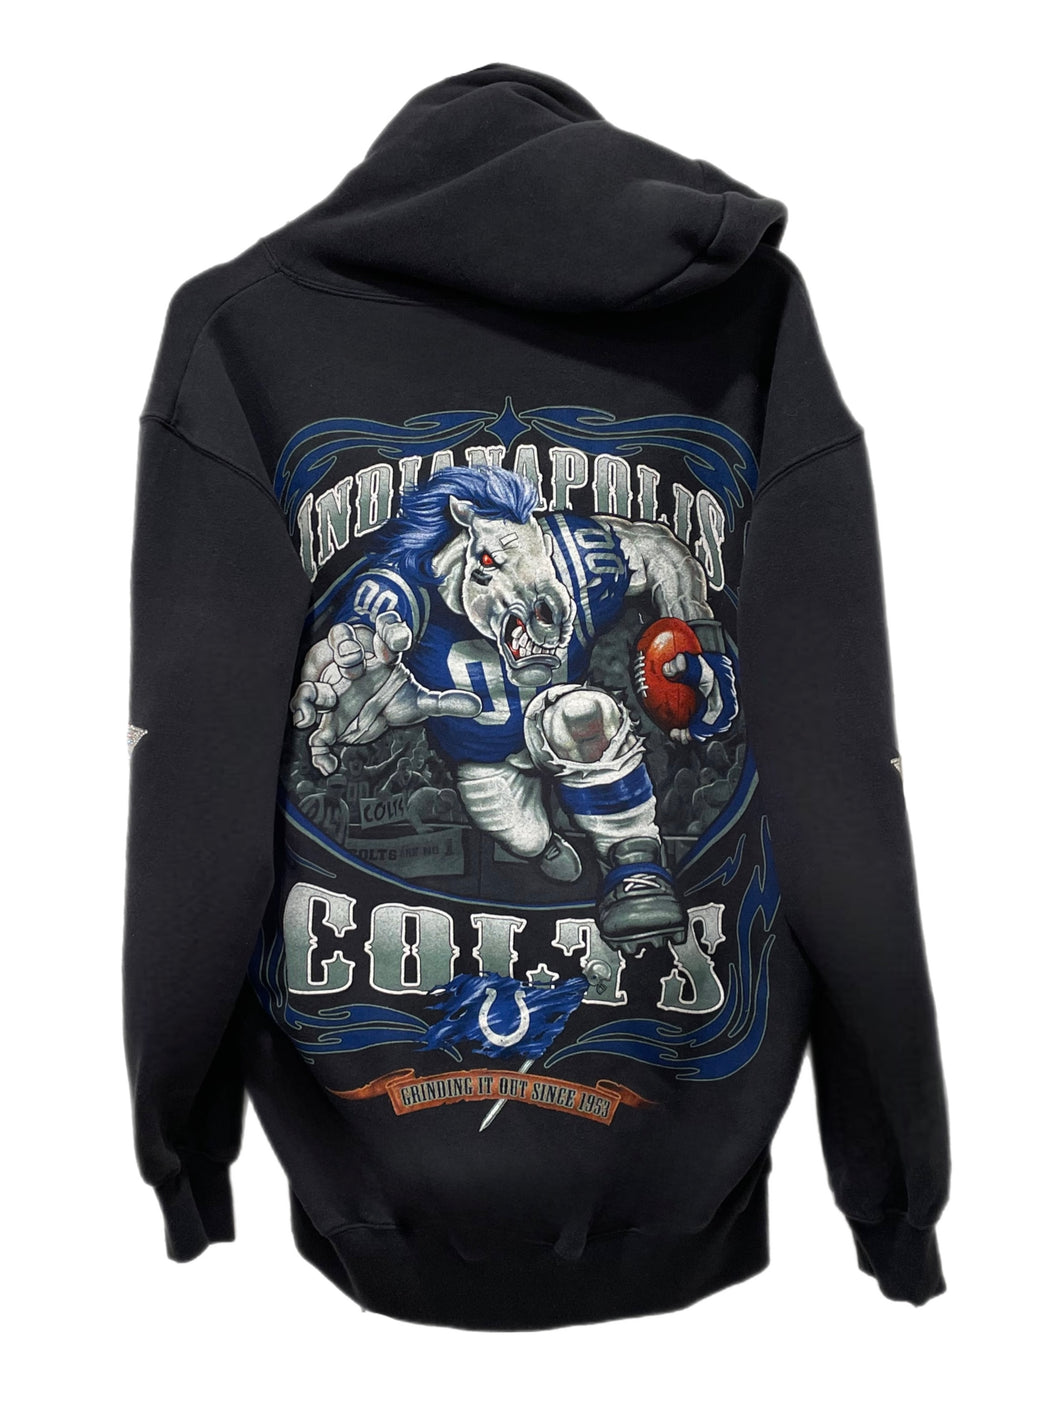 Indianapolis Colts, NFL One of a KIND Vintage Hoodie with Crystal Star Design